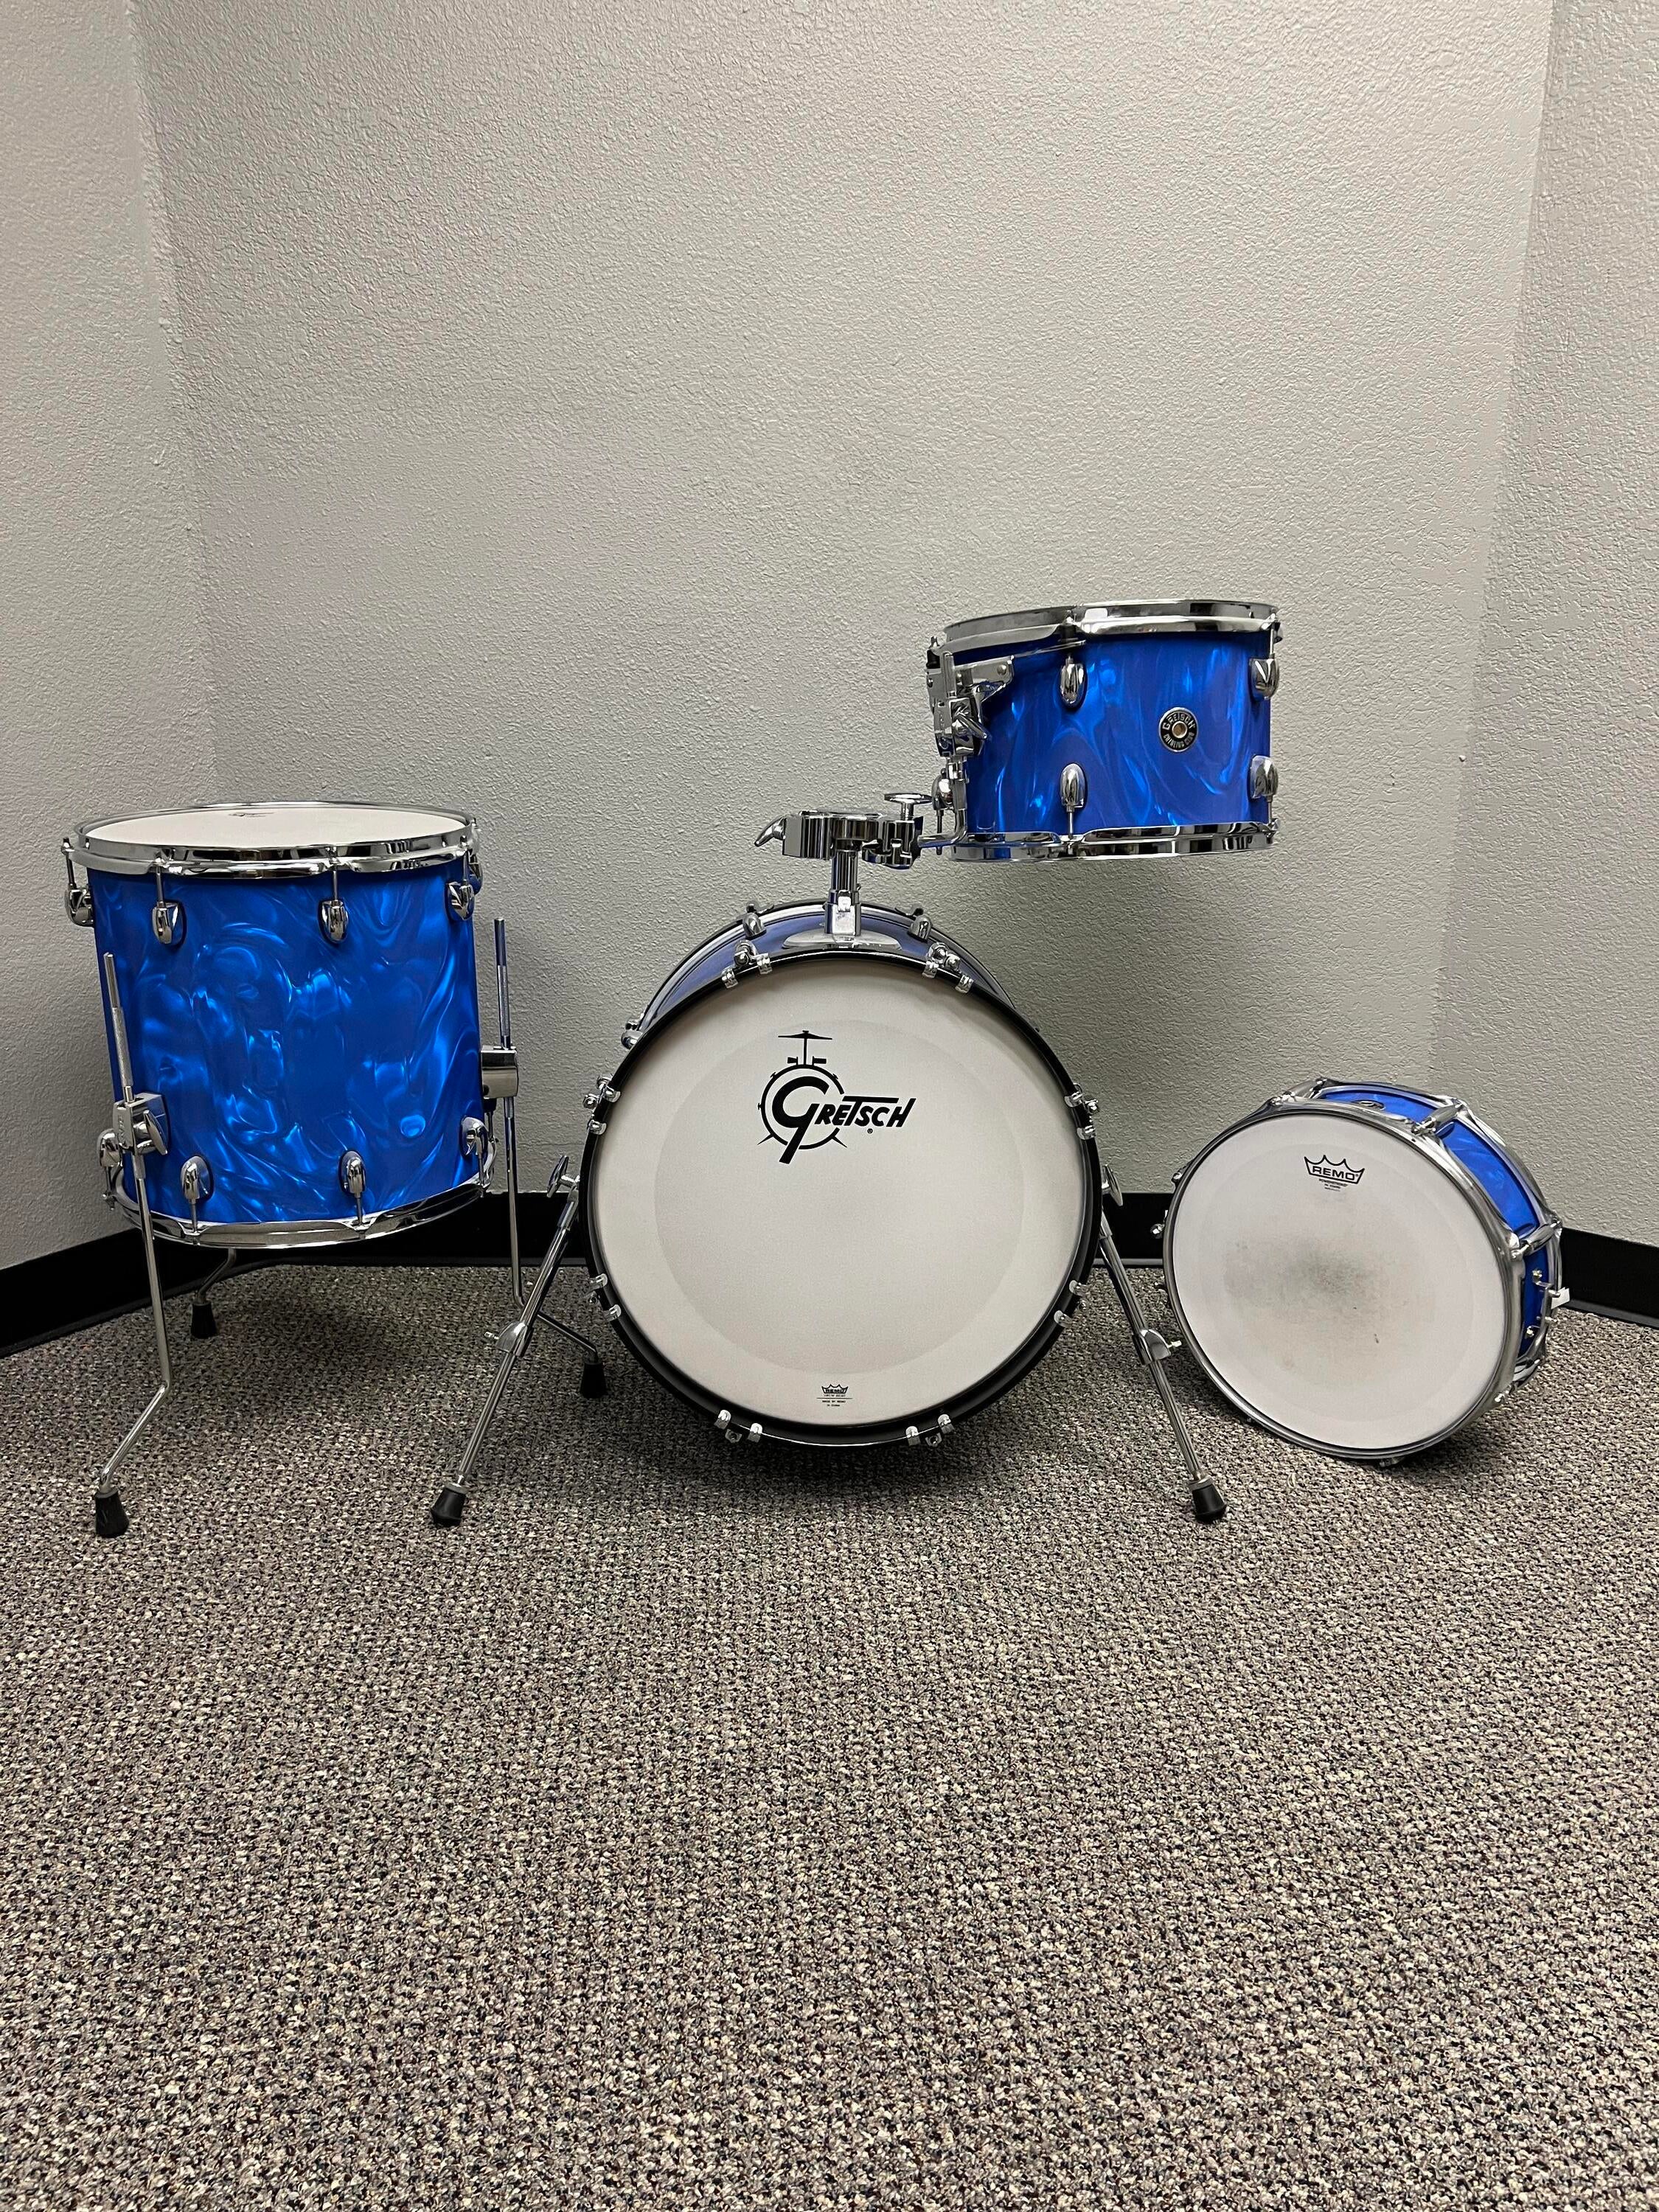 Used Gretsch Drums Catalina Club CT1-J484 - Sweetwater's Gear Exchange